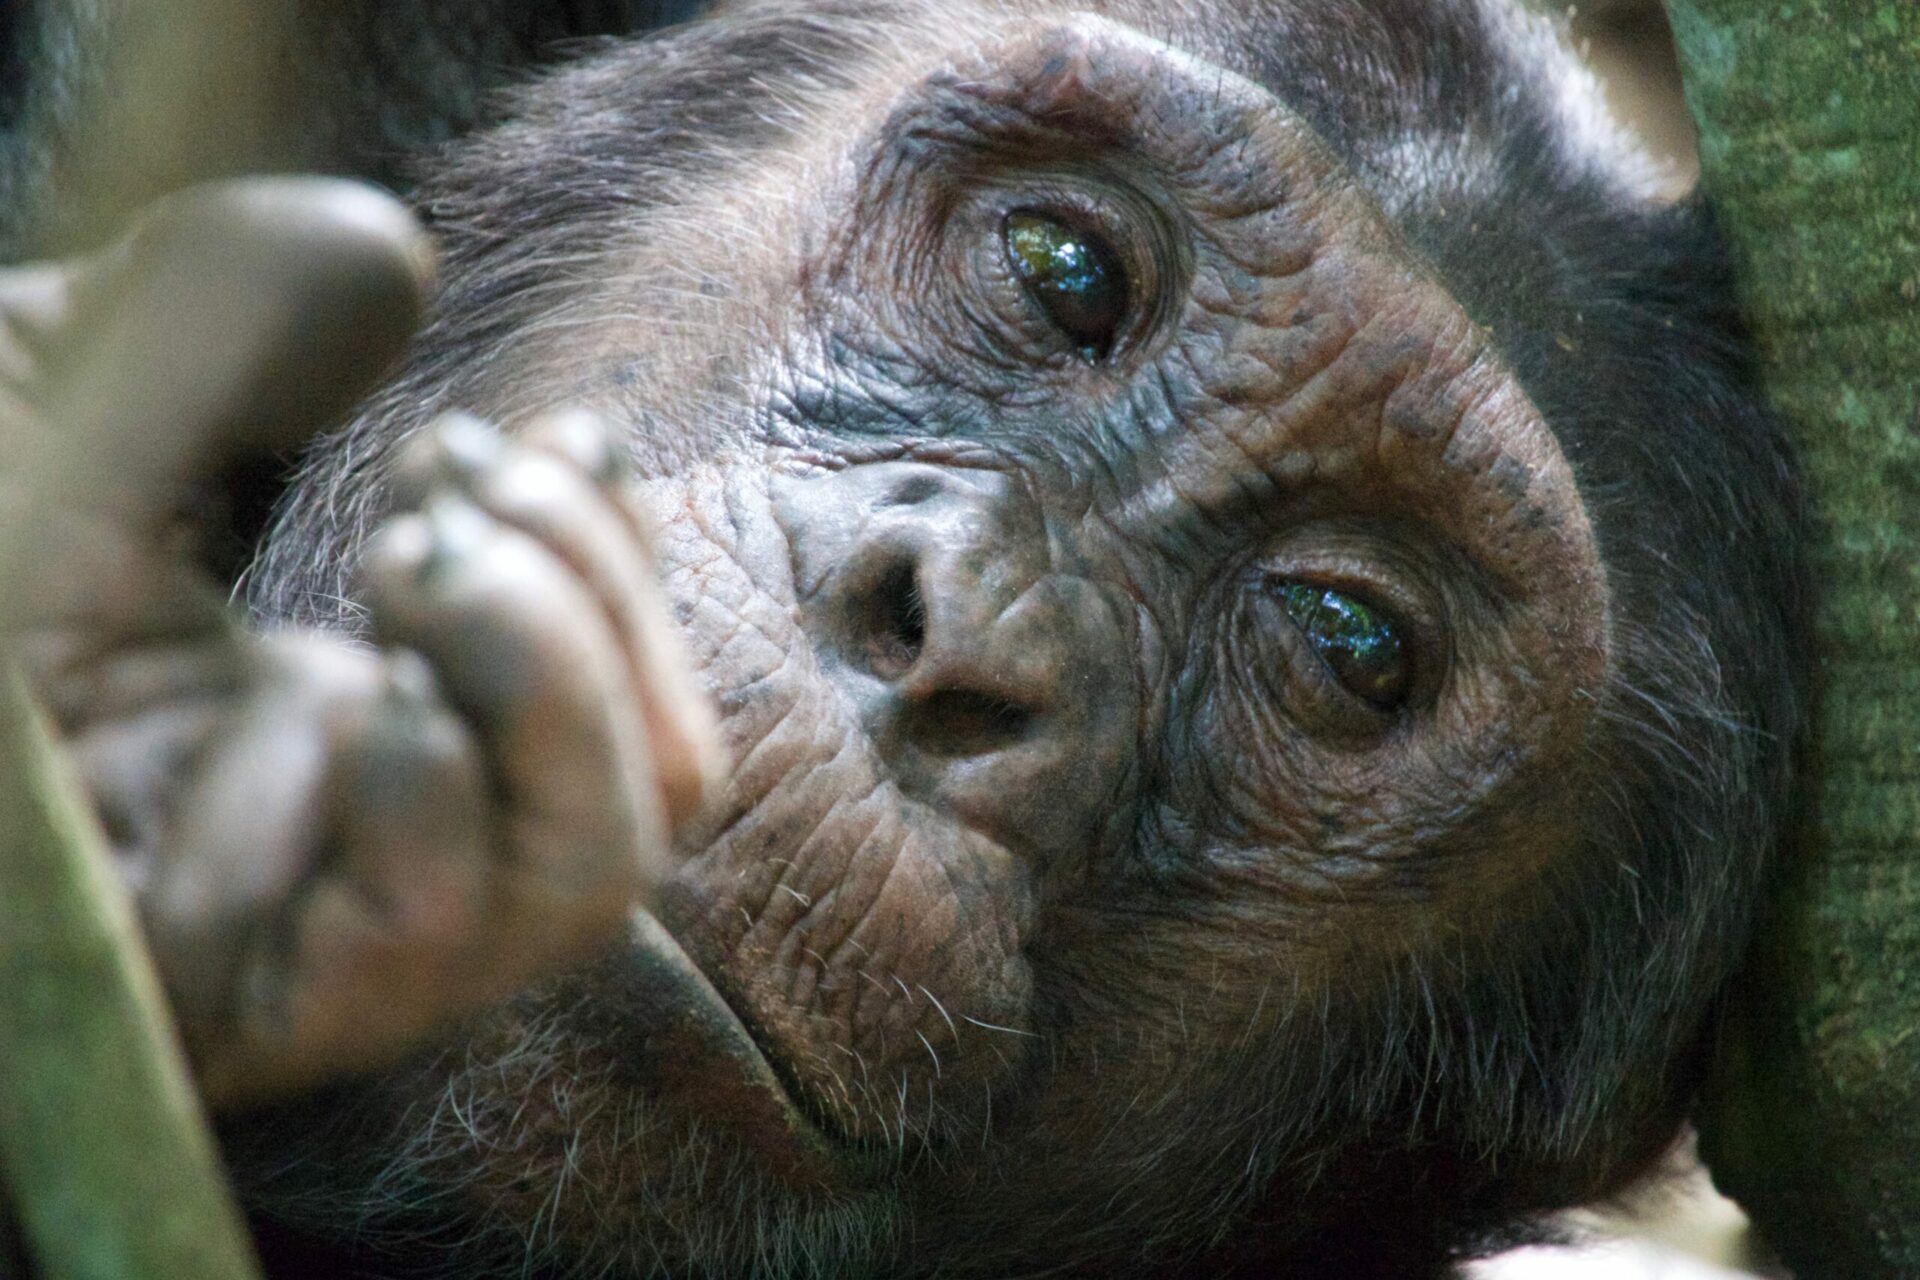 close up of chimpanzee's face and hand